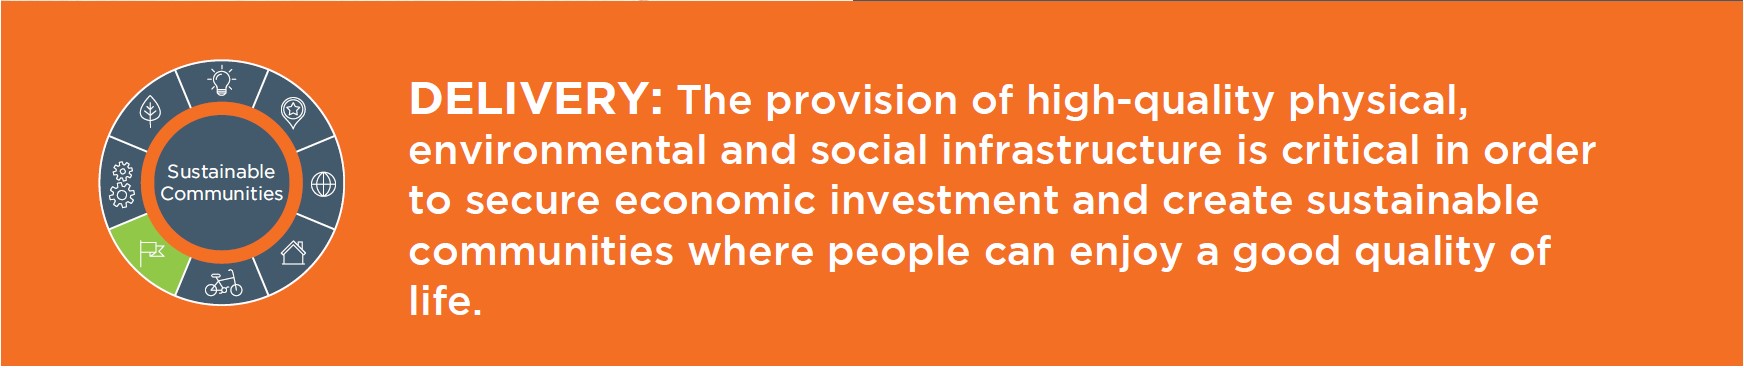 The provision of high-quality physical, environmental and social infrastructure, is critical in order to secure economic investment and create sustainable communities where people can enjoy a good quality of life.